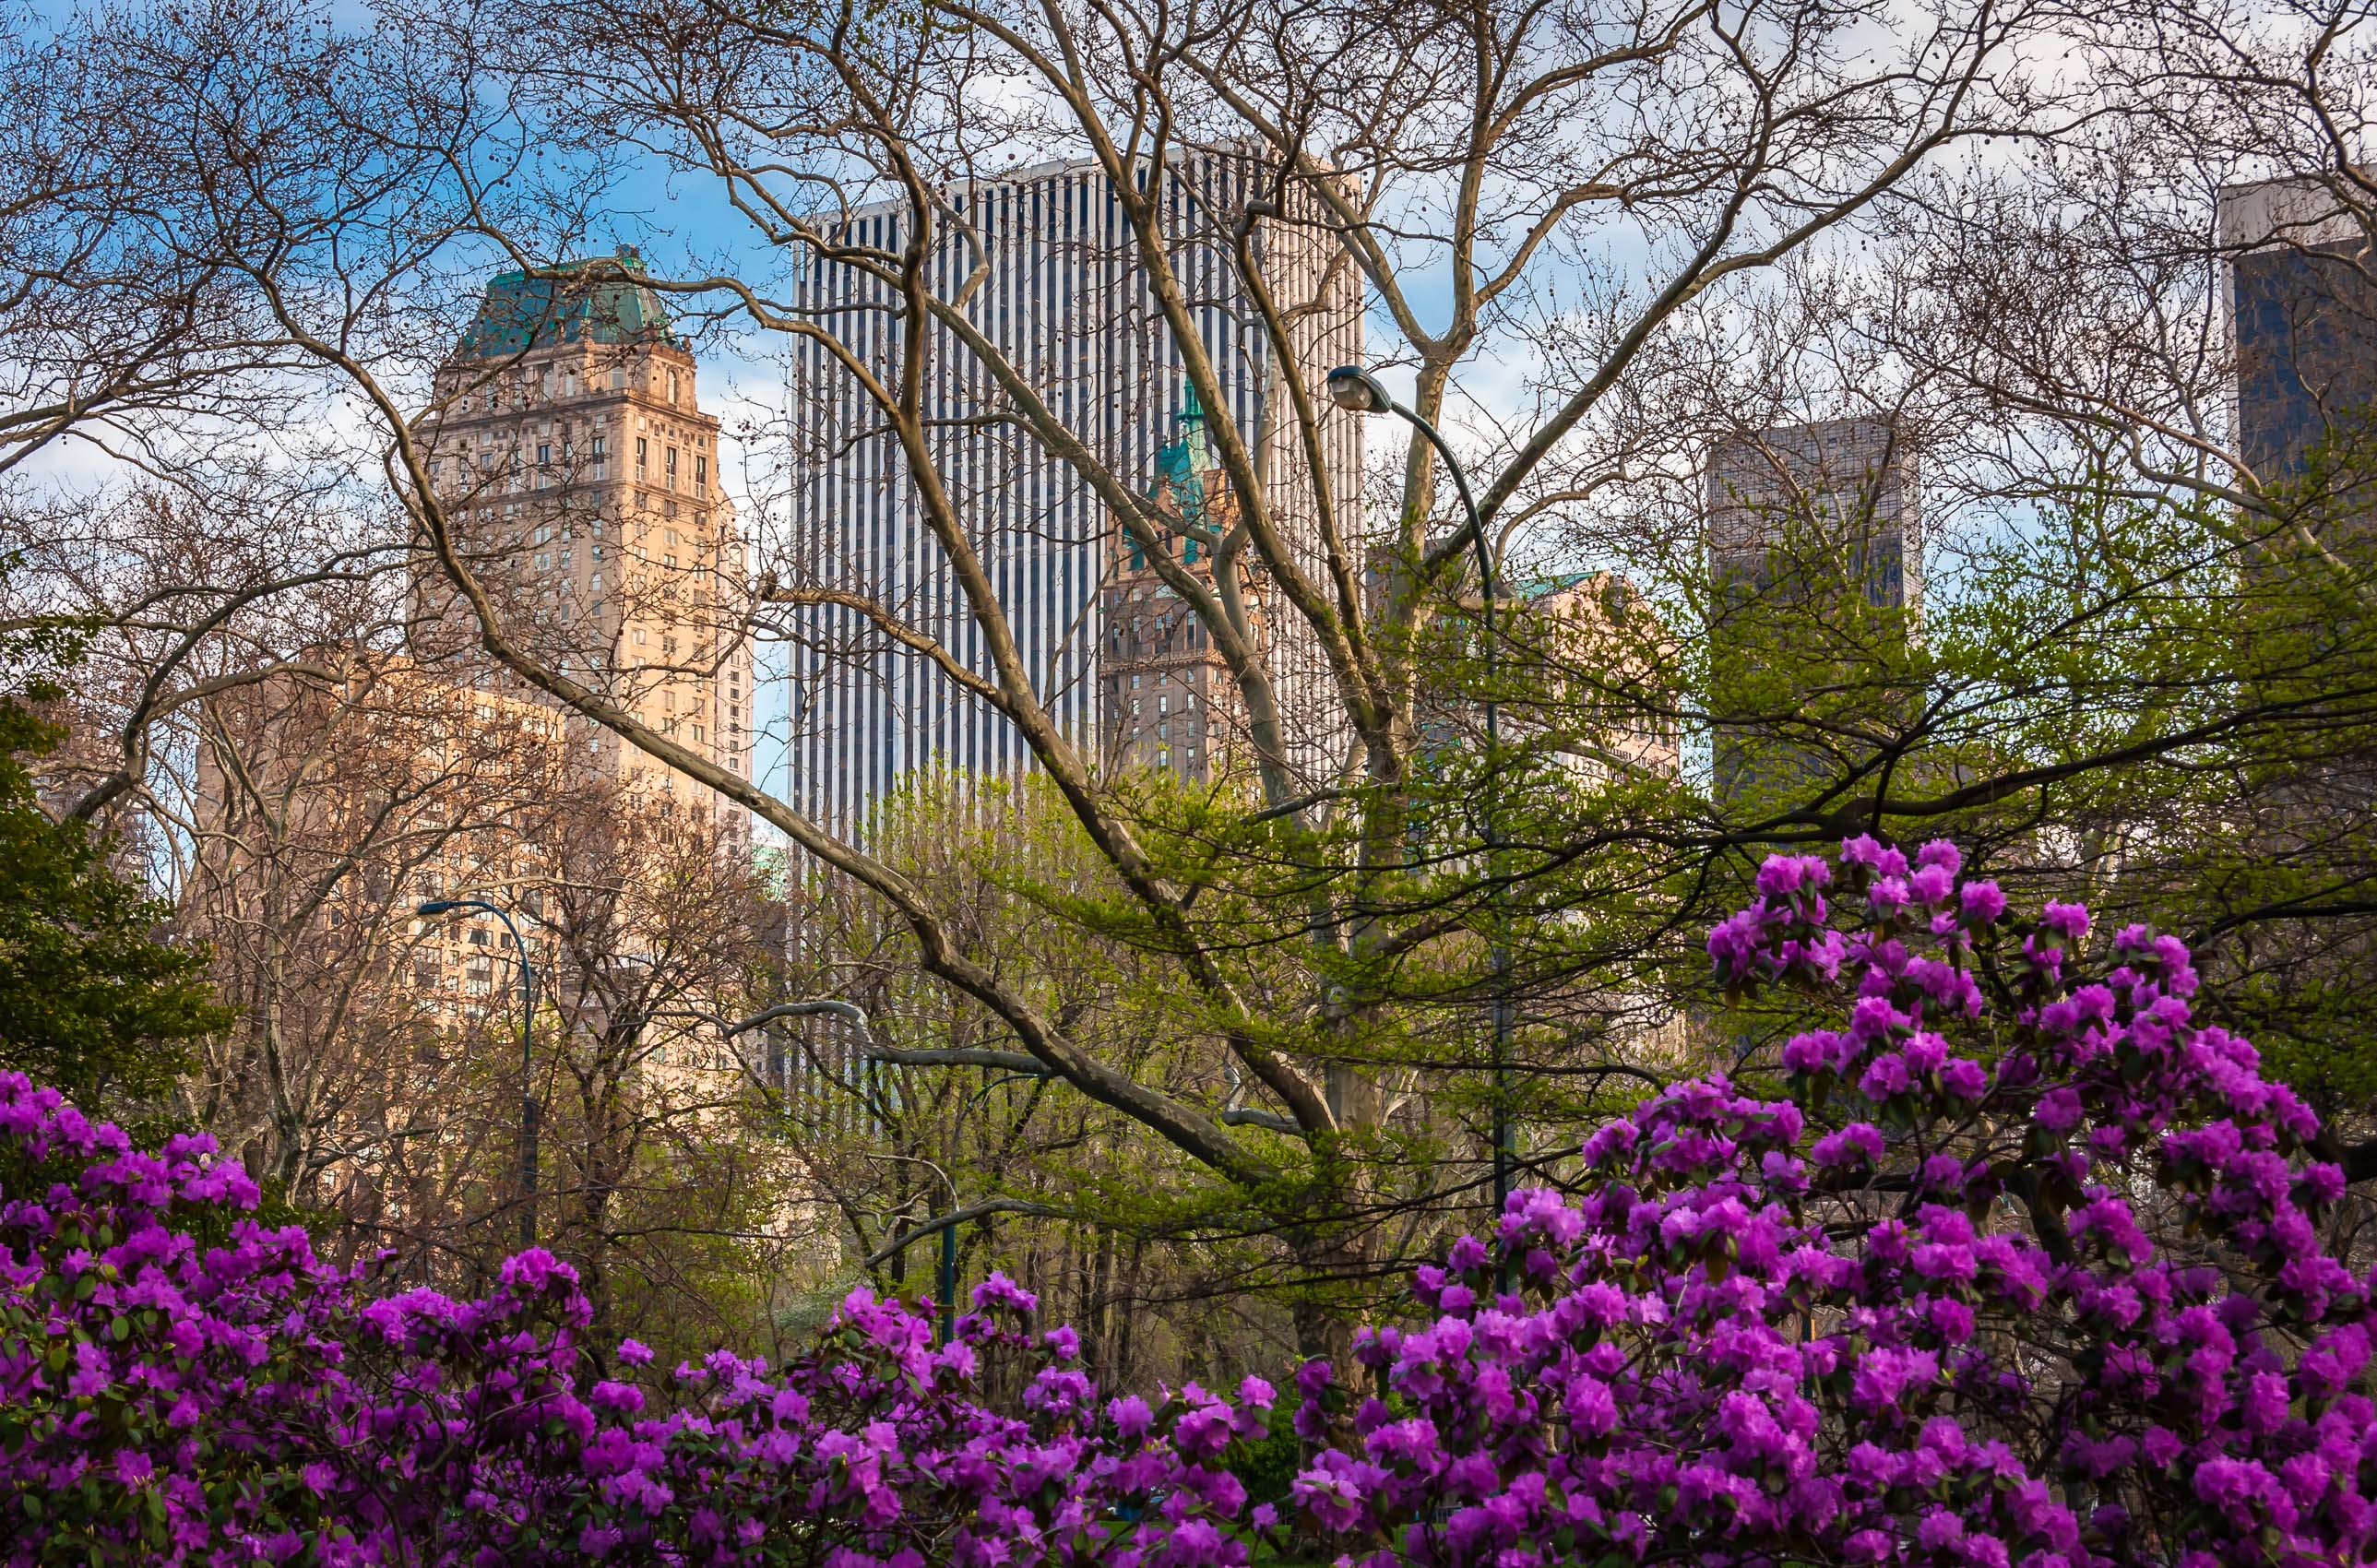 Flowers and budding trees in Central Park, New York City NY020